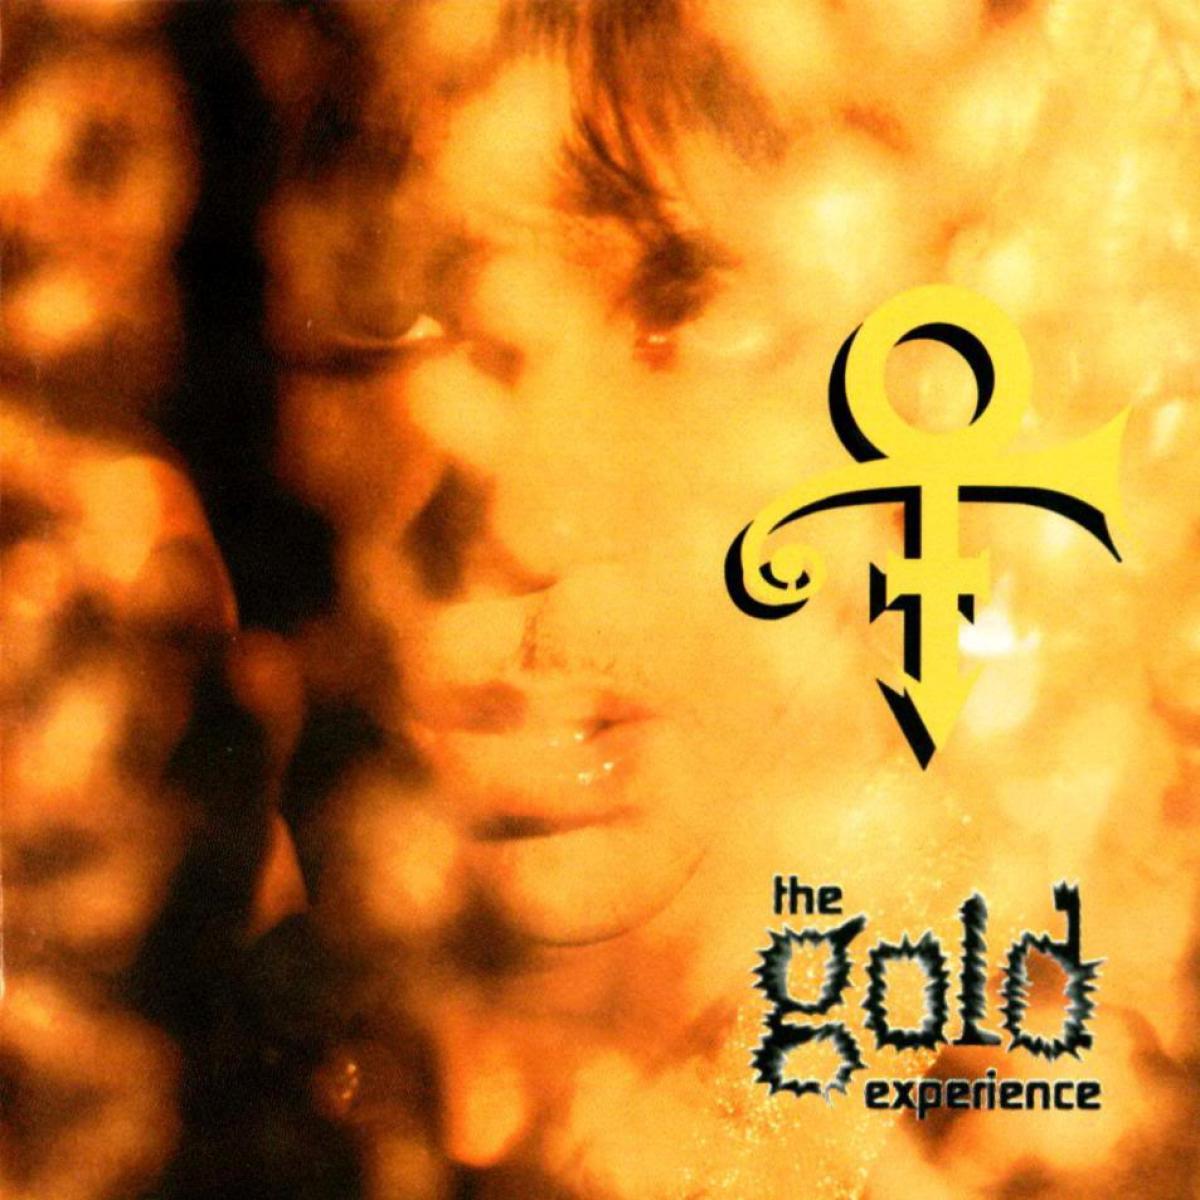 The Gold Experience, released September 26, 1995. Another album that had “old songs” (recorded between 1992 and 1995) as this was part of the group that had songs shifting between them.